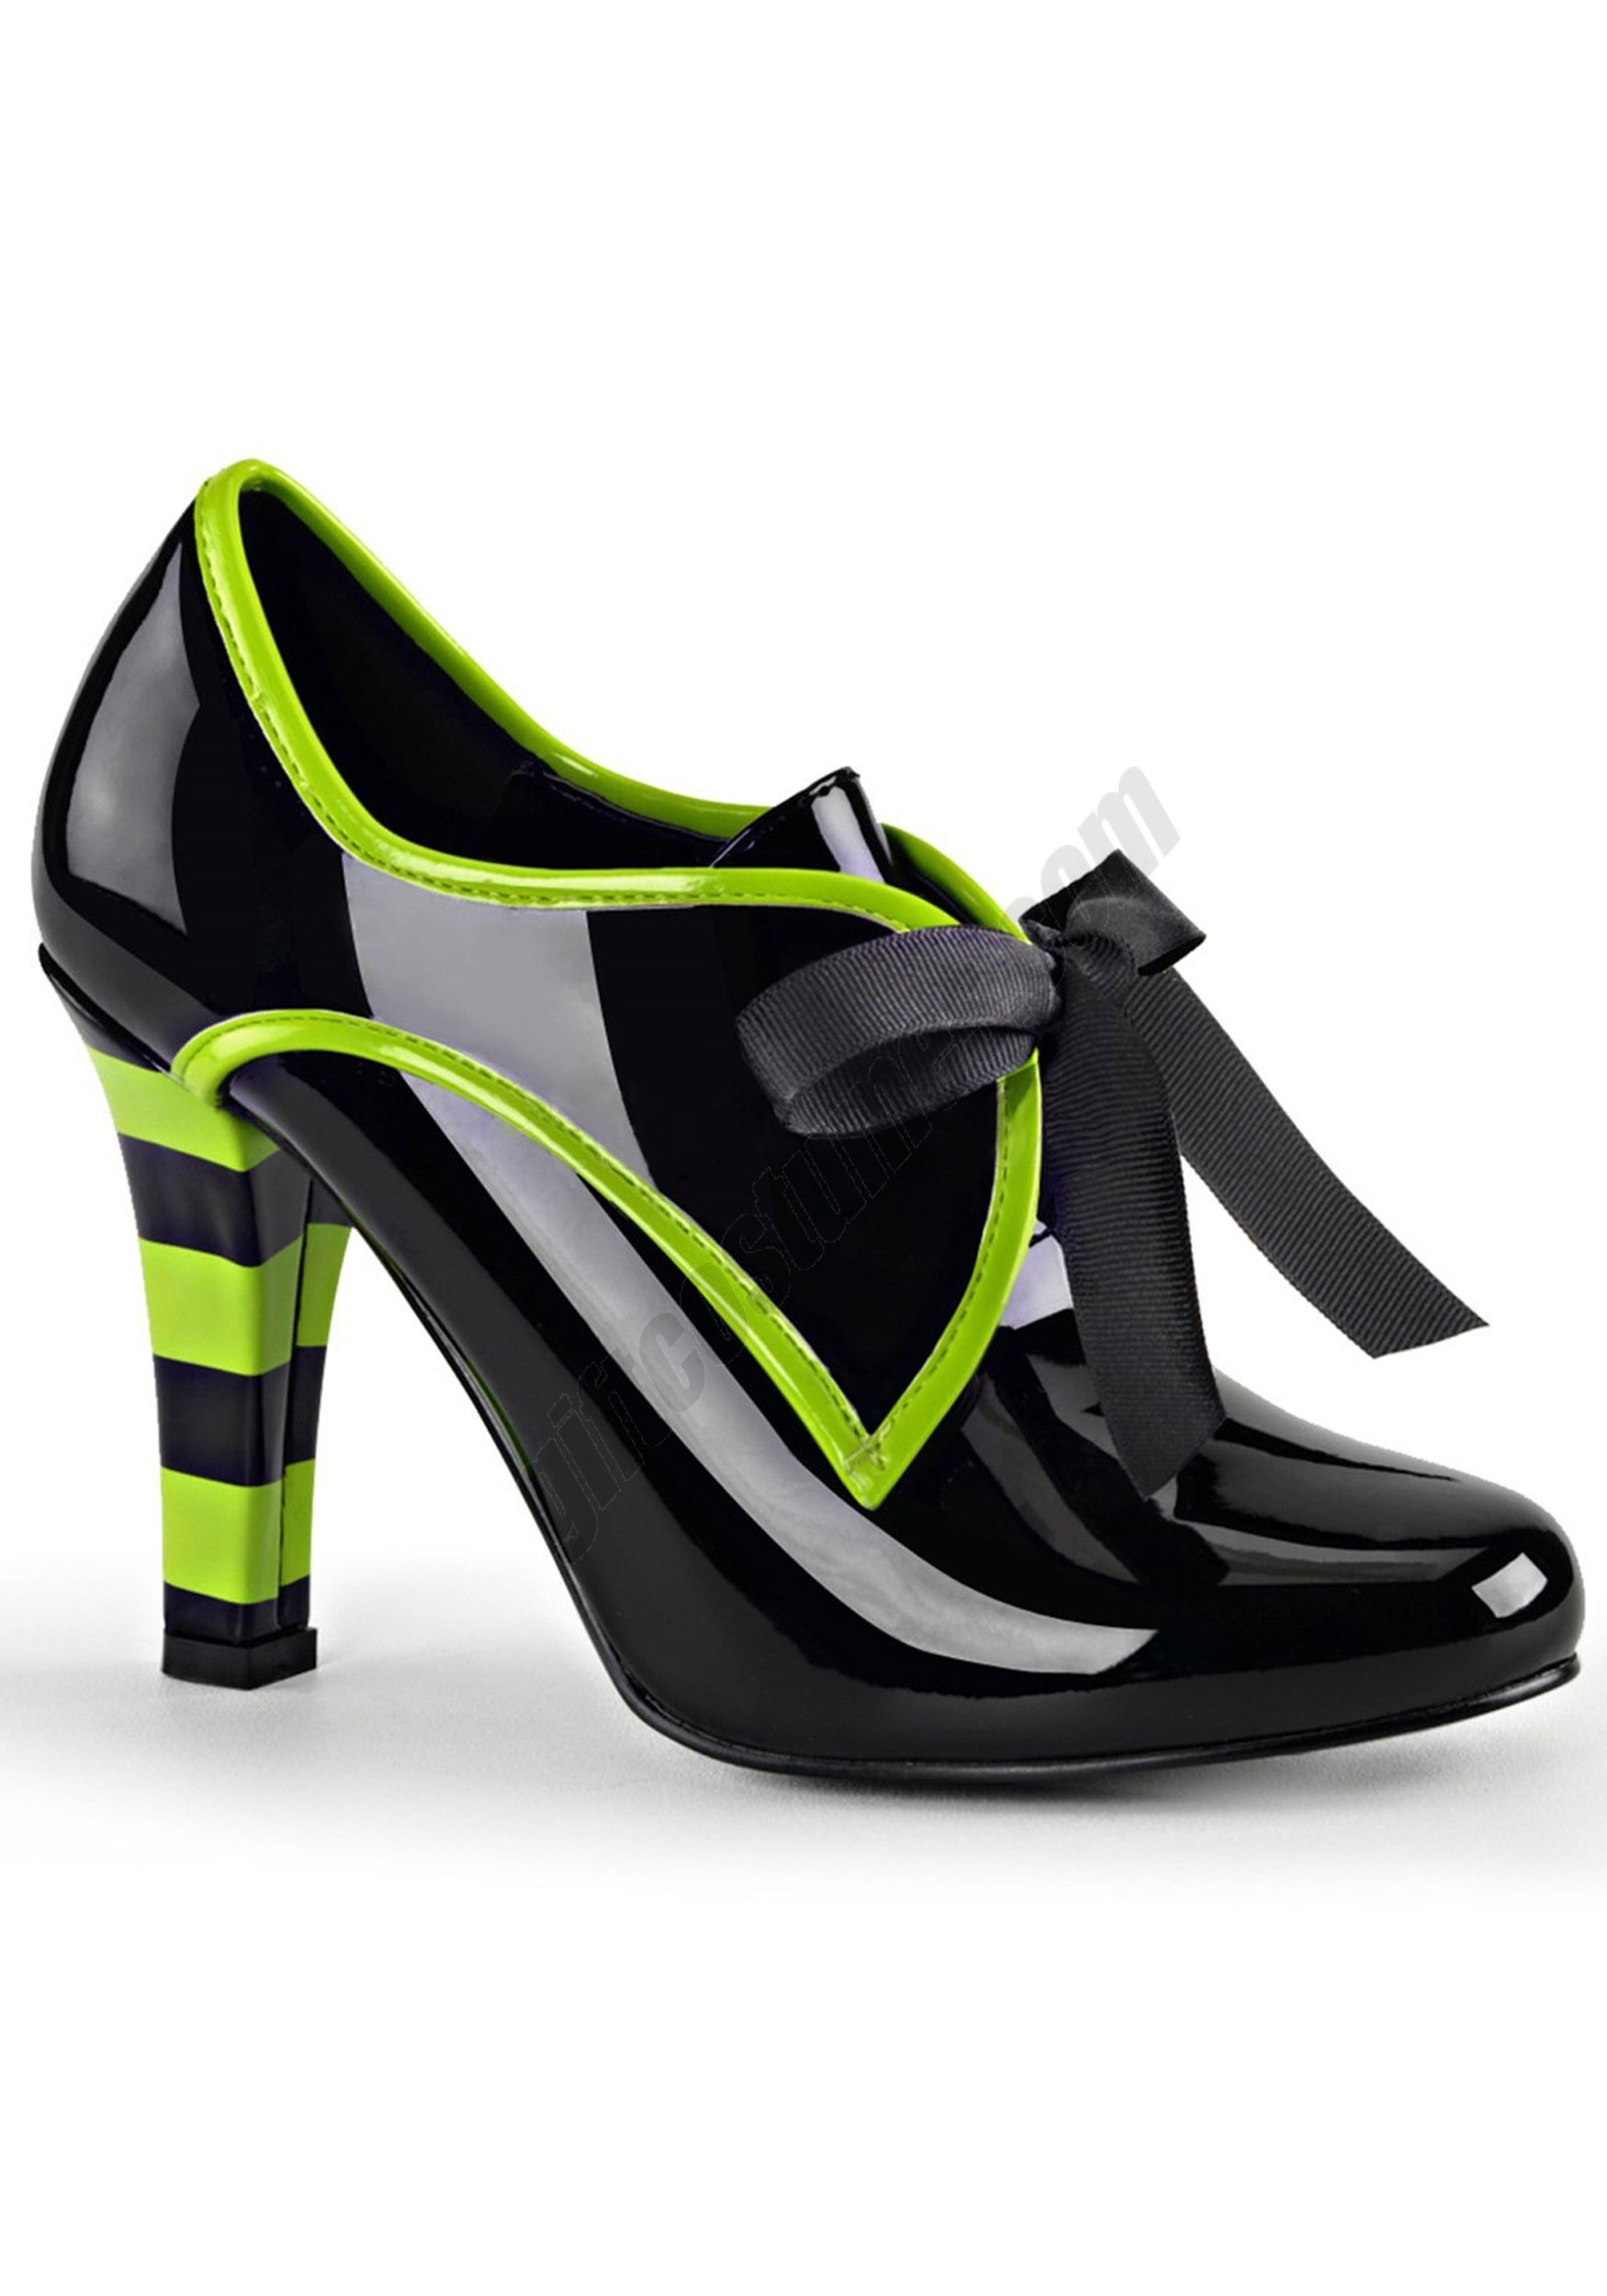 Green Witch Shoes for Women Promotions - Green Witch Shoes for Women Promotions